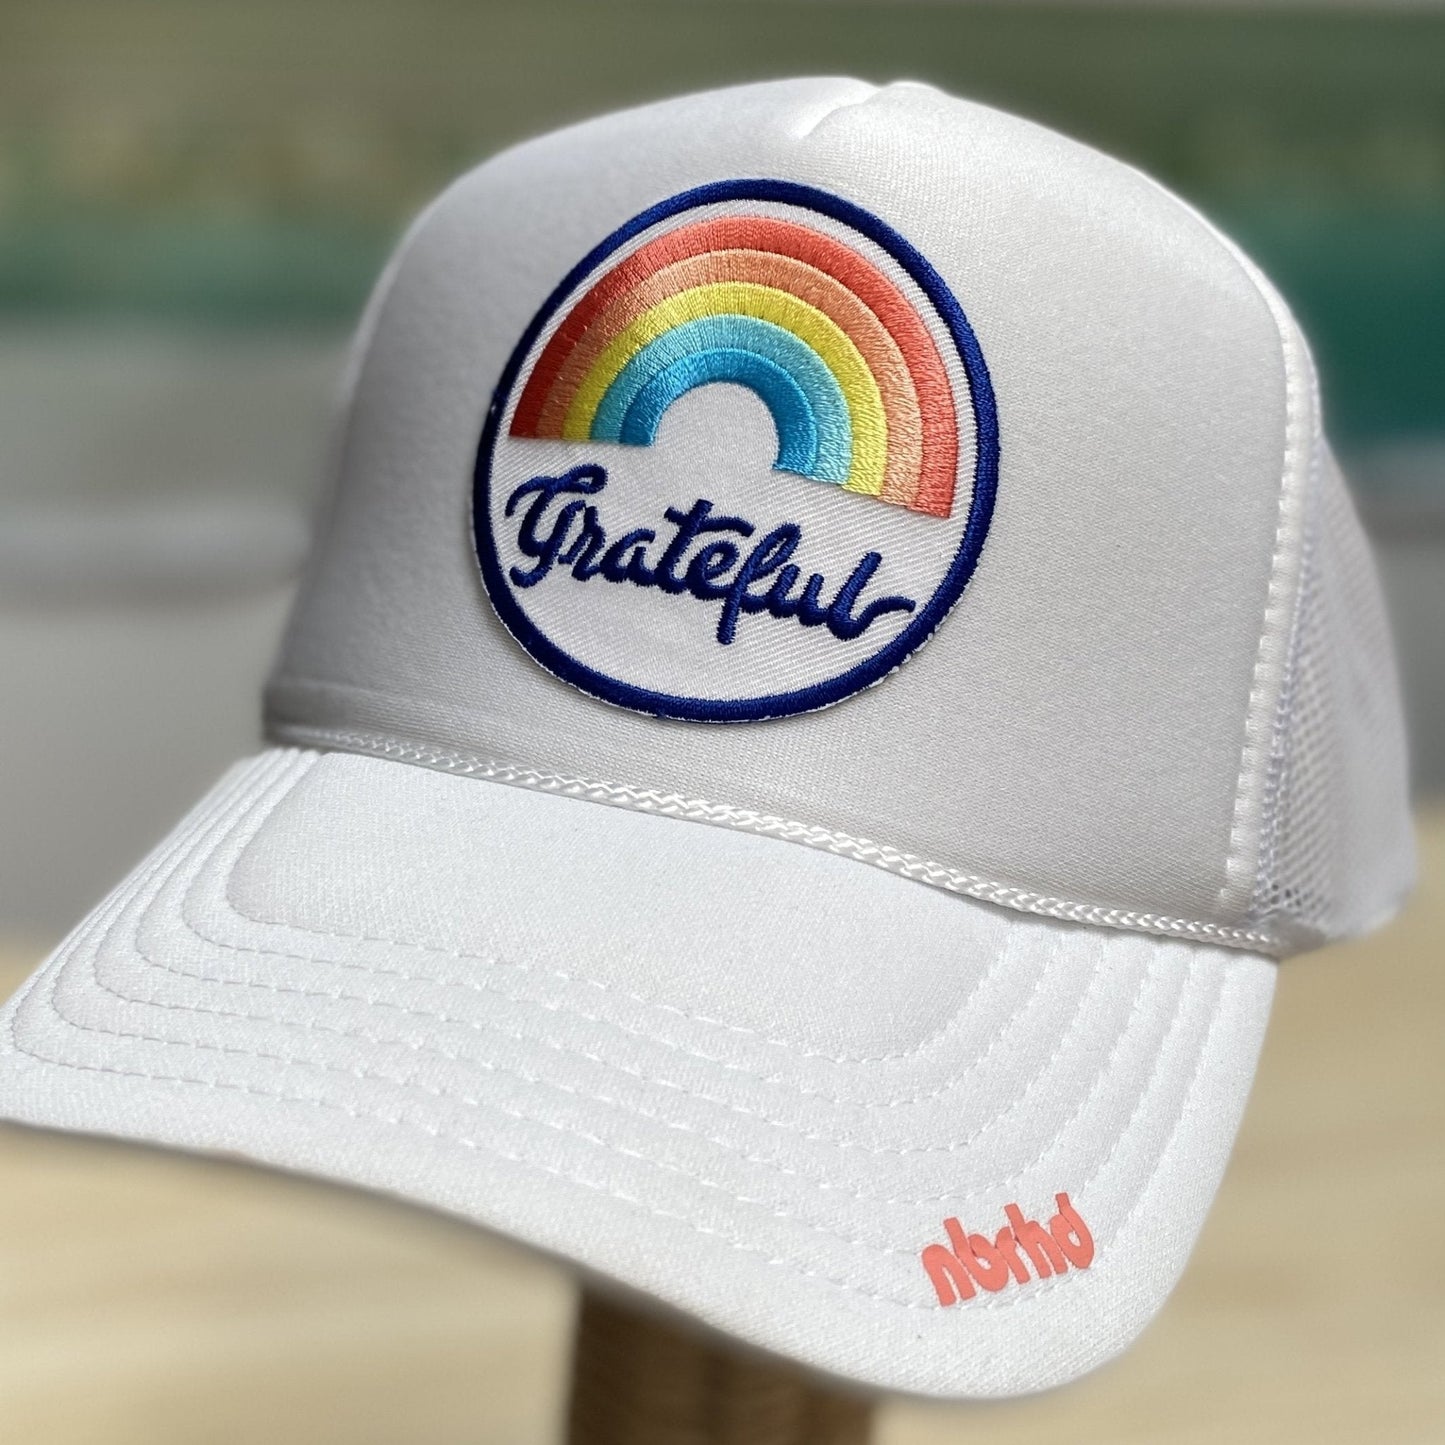 Grateful Patch Trucker Hat - The Riviera Towel Company